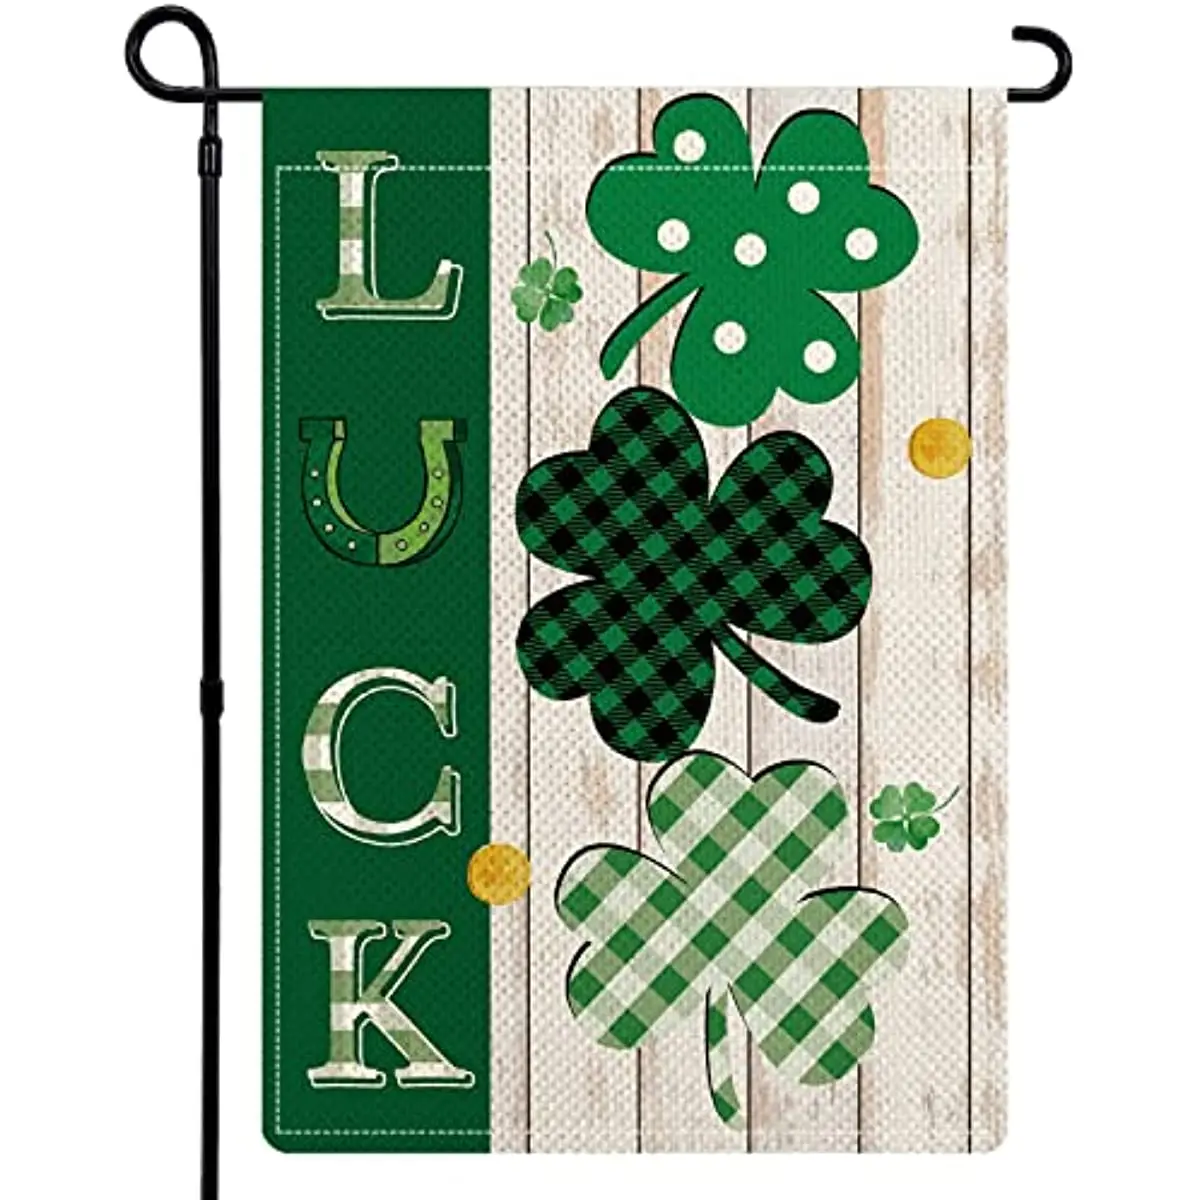 

St Patricks Day Garden Flag 12x18 Inch Double Sided Green Clover Spring Rustic Luck Shamrock Plaid Flag for Yard Patio Outdoor